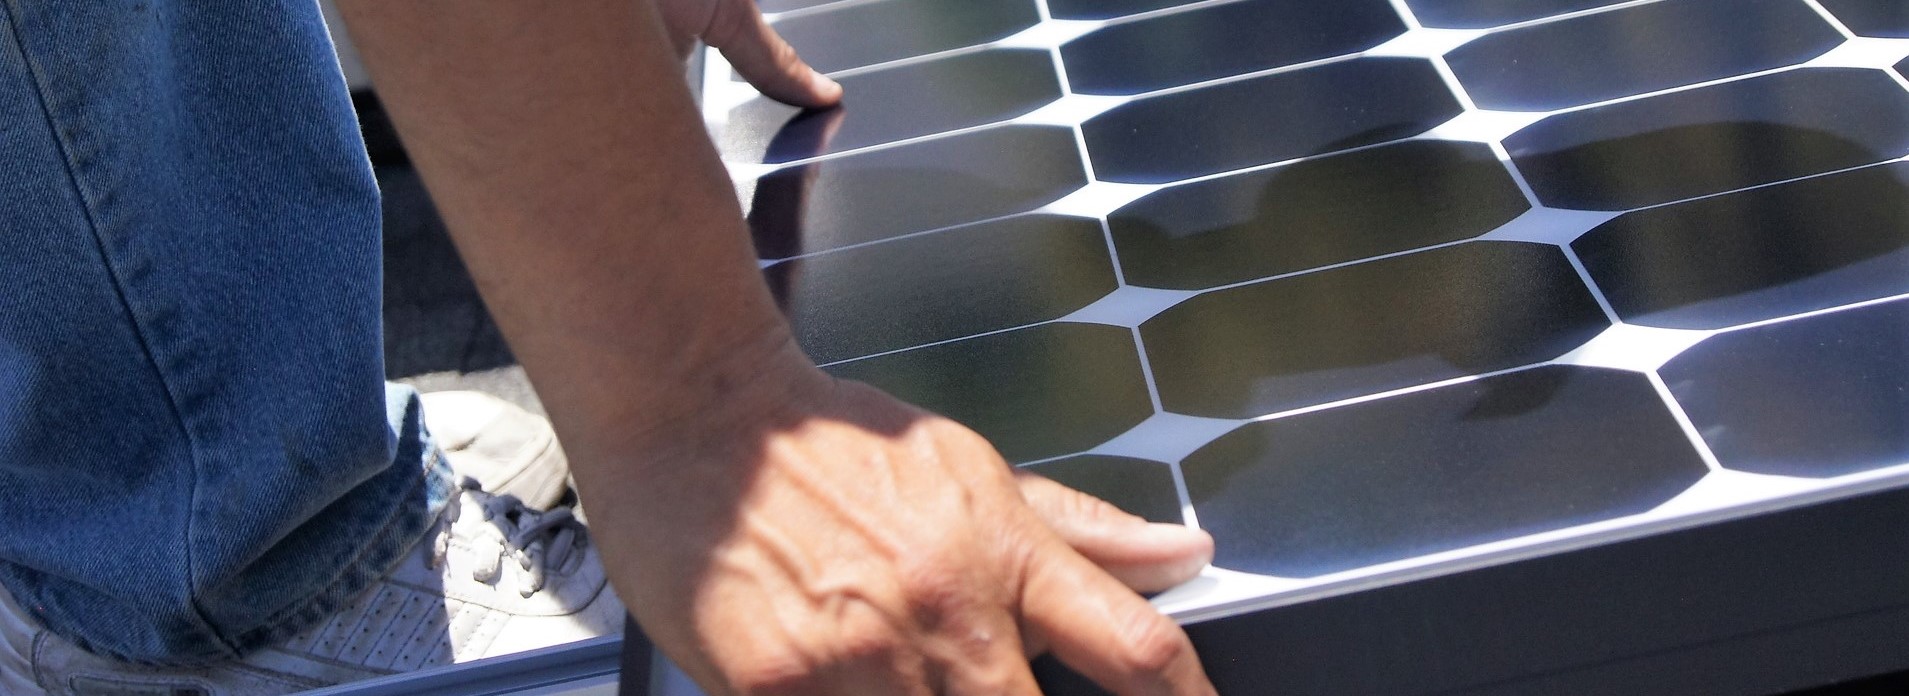 solar panel workers hand